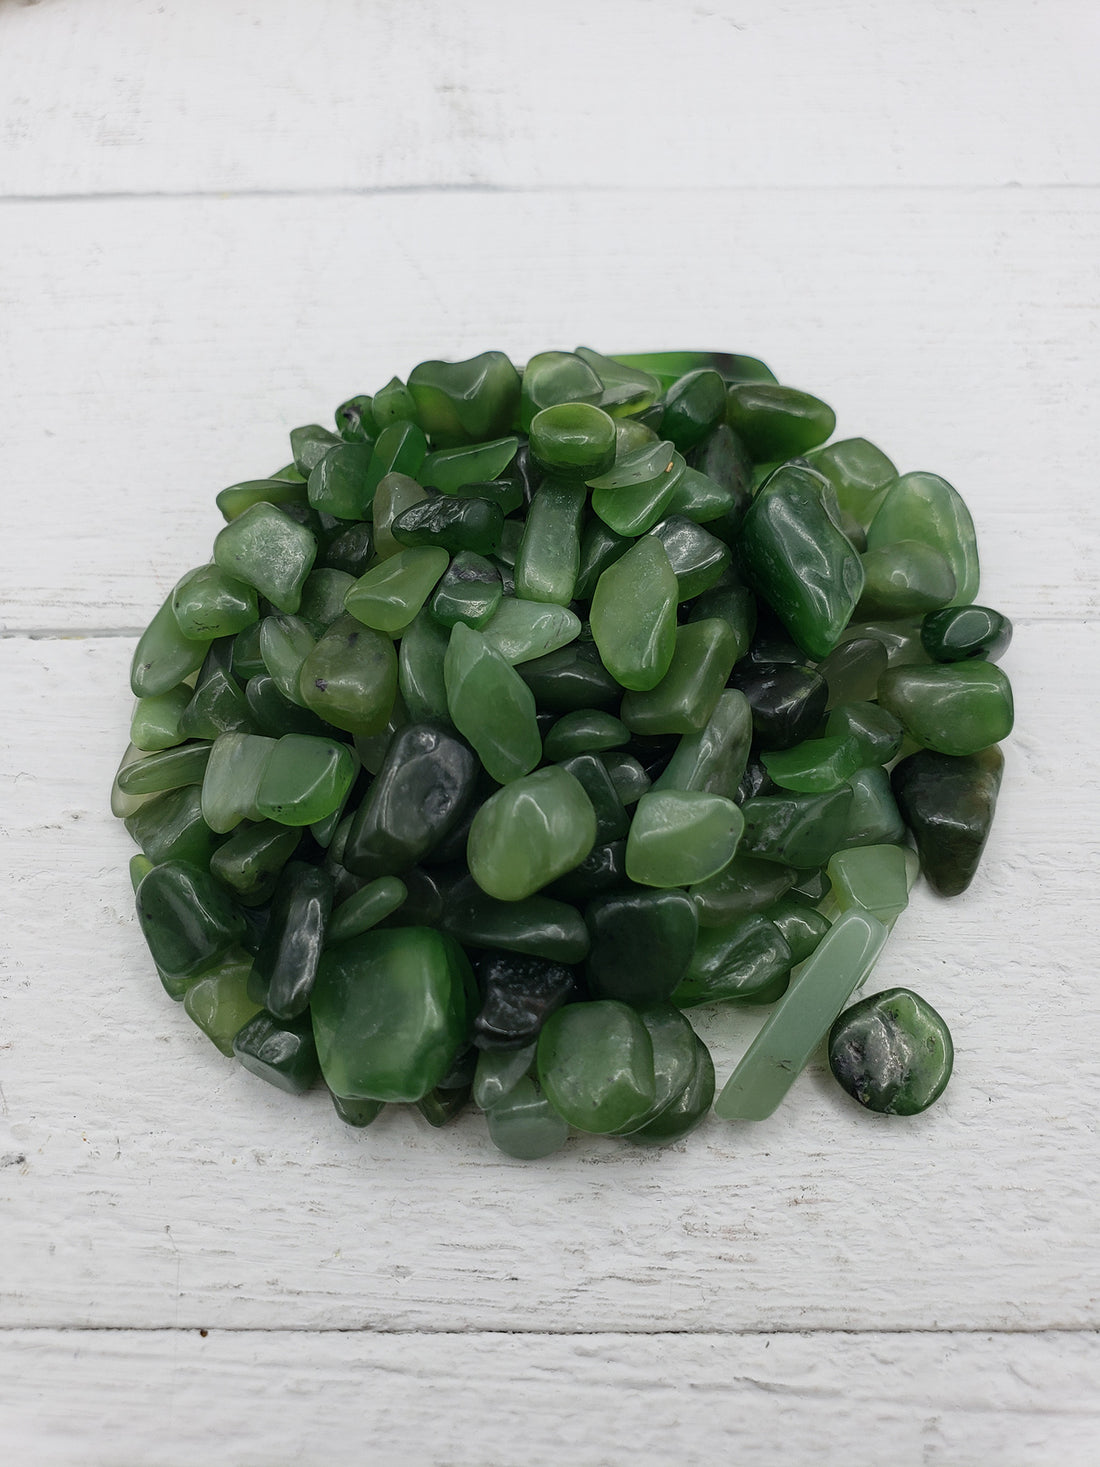 Two ounces of nephrite jade chips on display